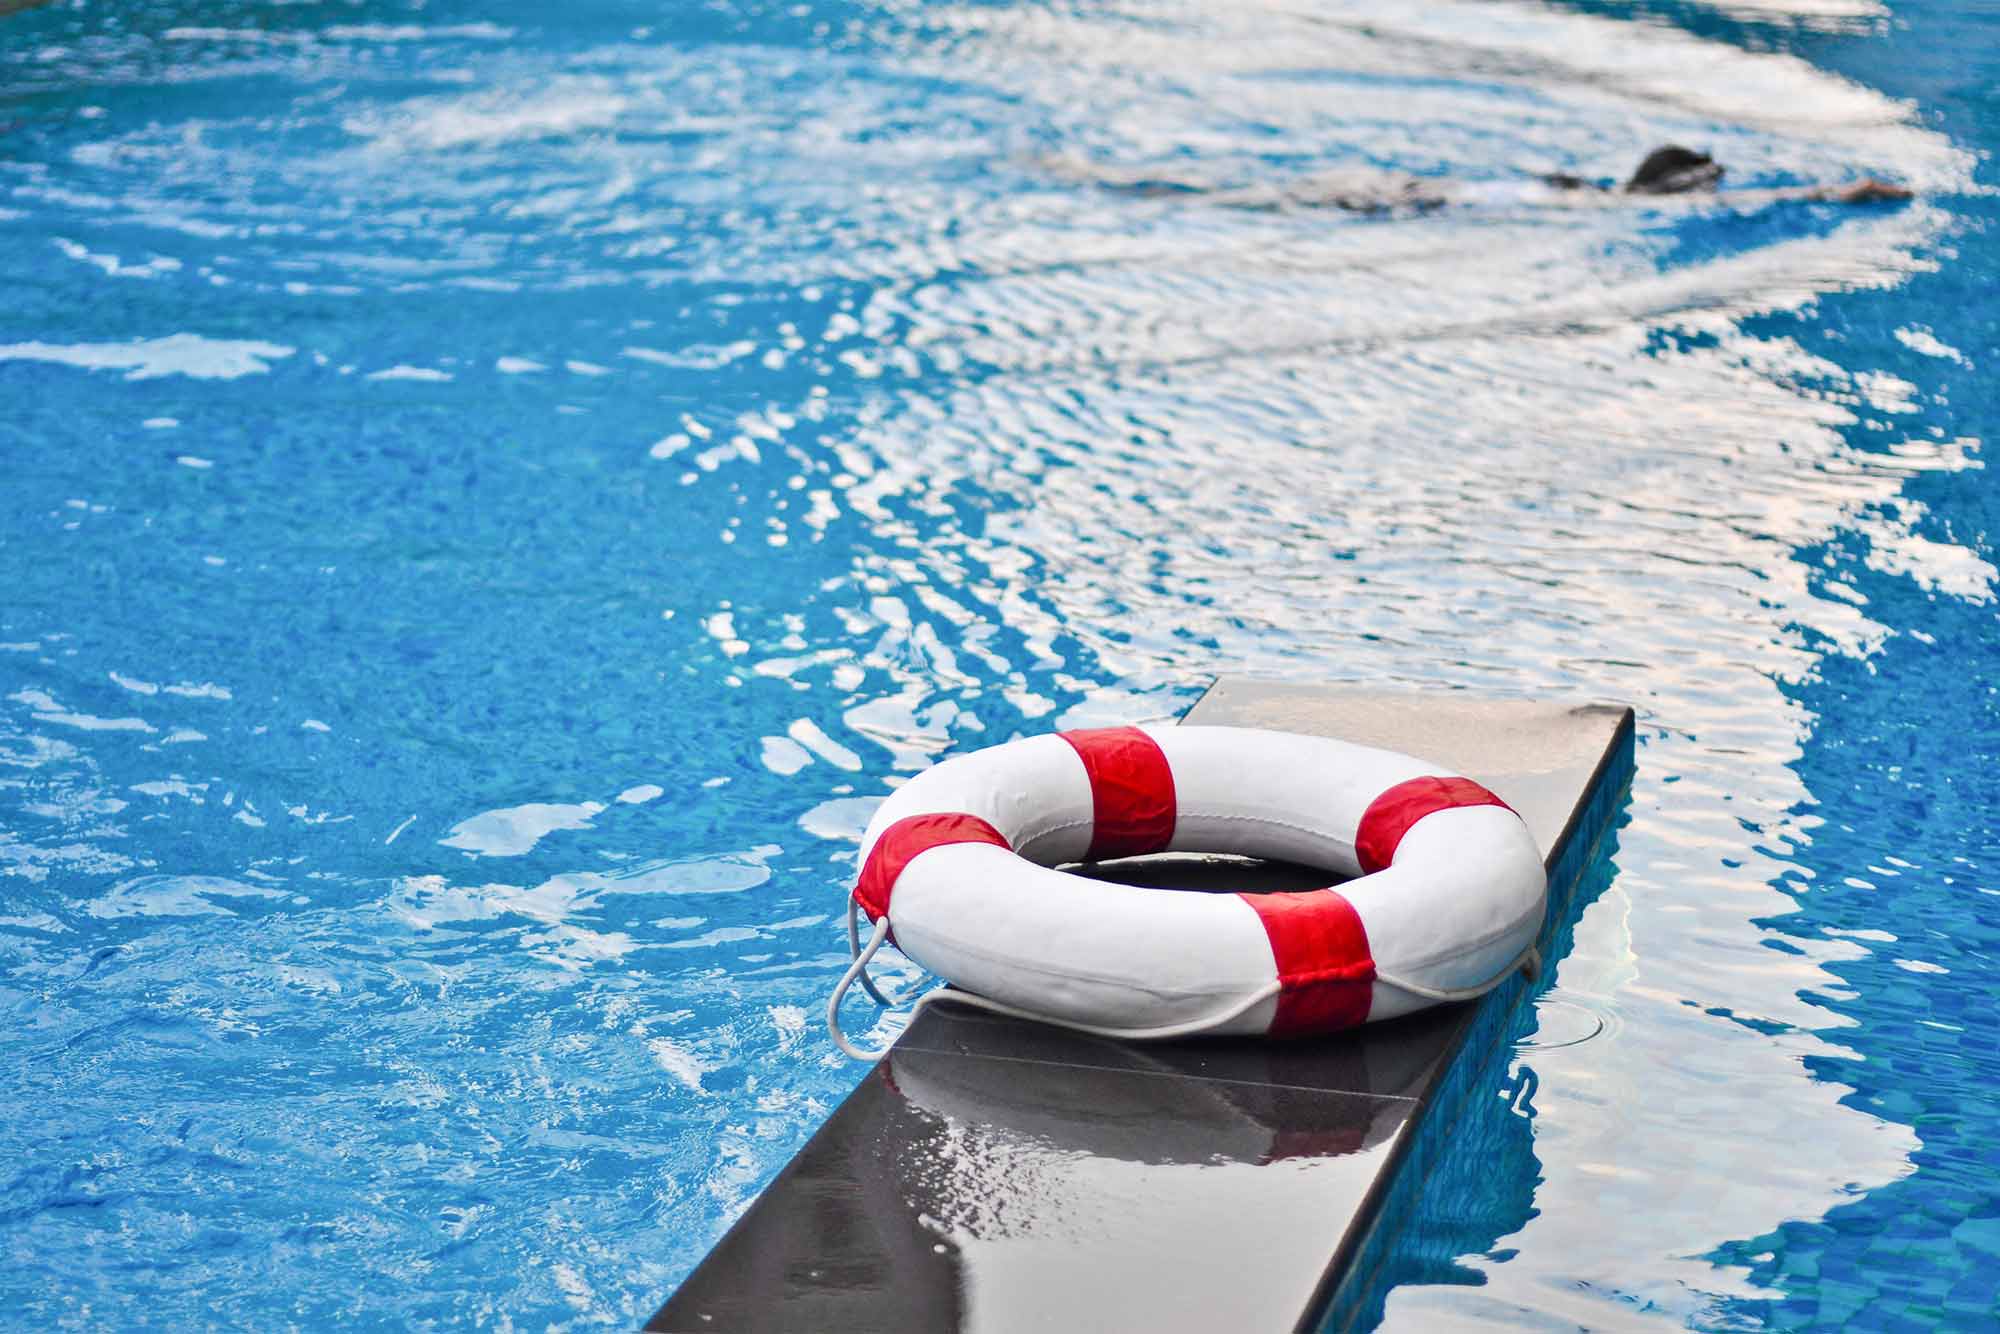 Contact Checkmate Safety for Pool Safety inspections